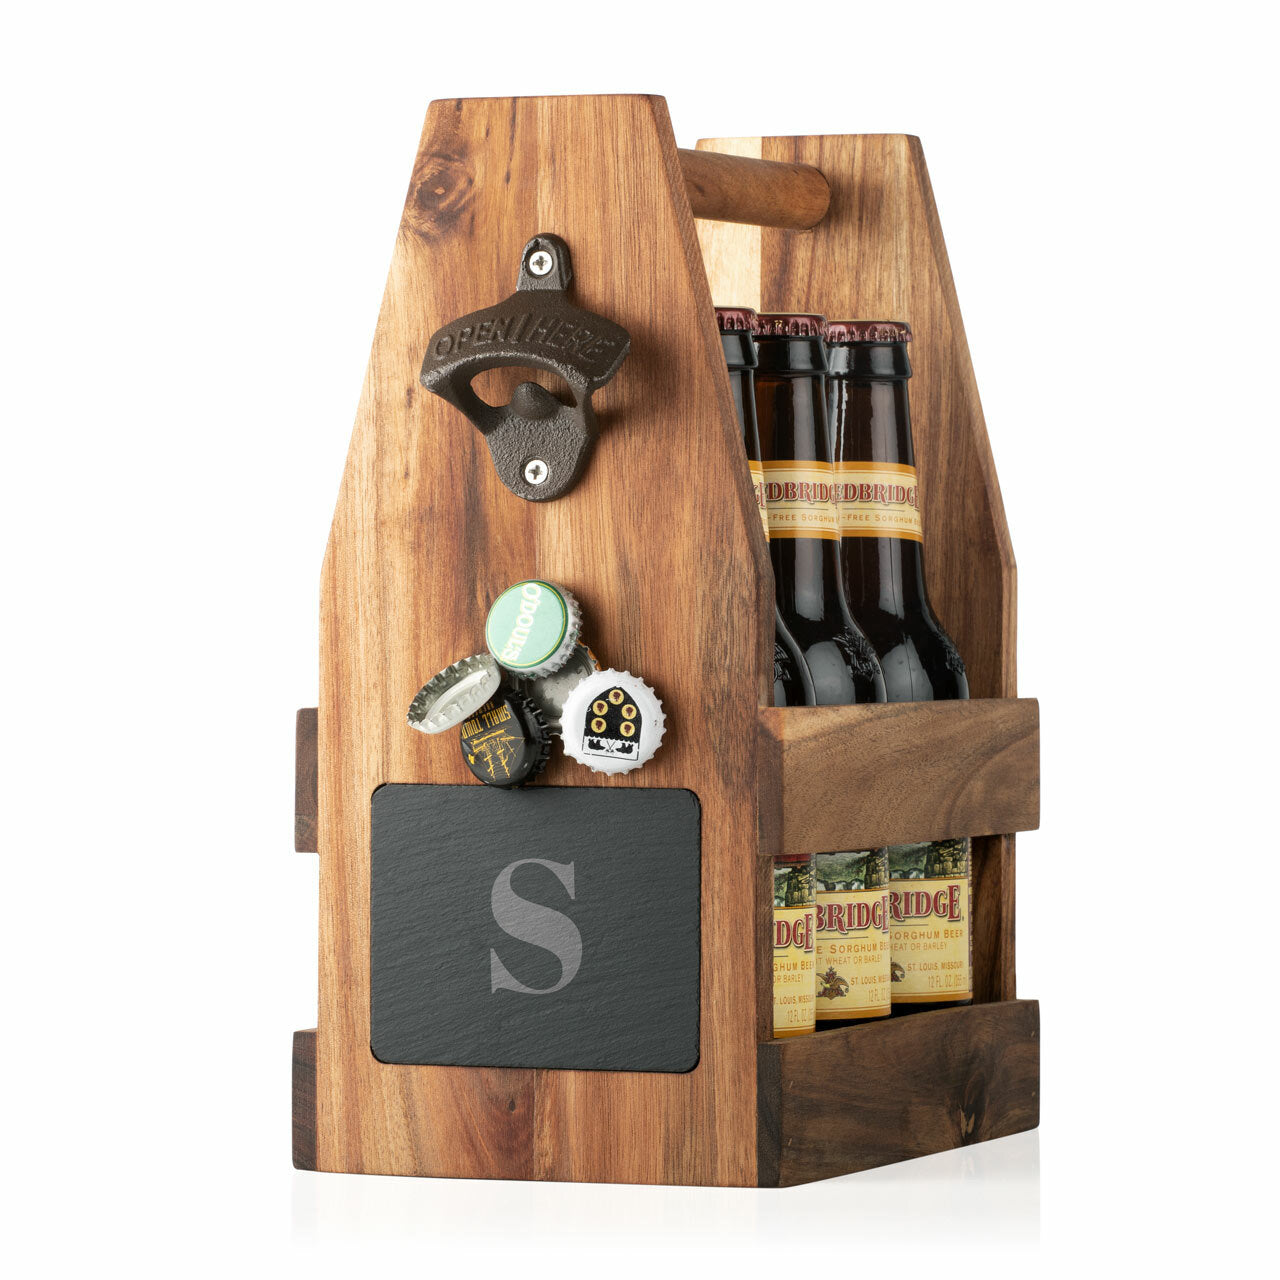 Amazon.com: STOFINITY 8th Anniversary Wood Gifts for Him Her - Wooden Gifts  for 8th Anniversary, 8 Year Gifts Anniversary for Husband Wife, Happy  Eighth Wedding Gift for Married Couples, Date Night Activities